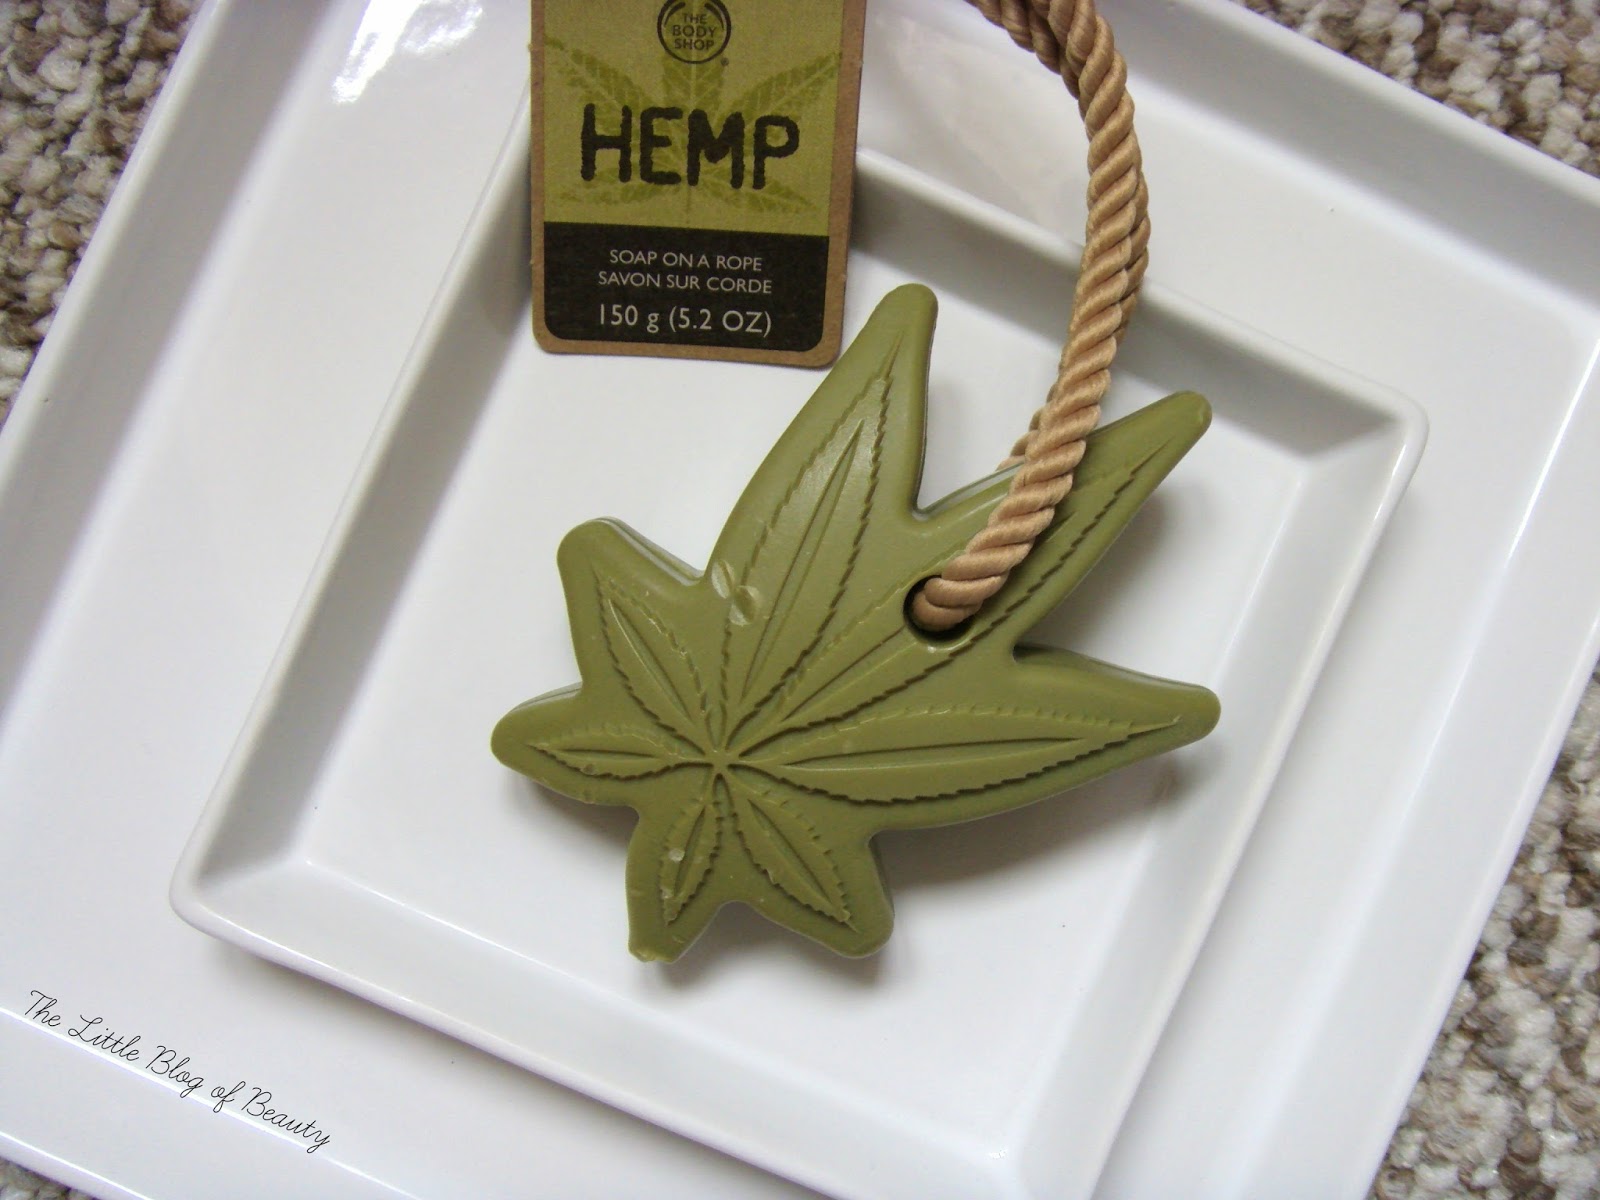 The Body Shop Hemp soap on a rope